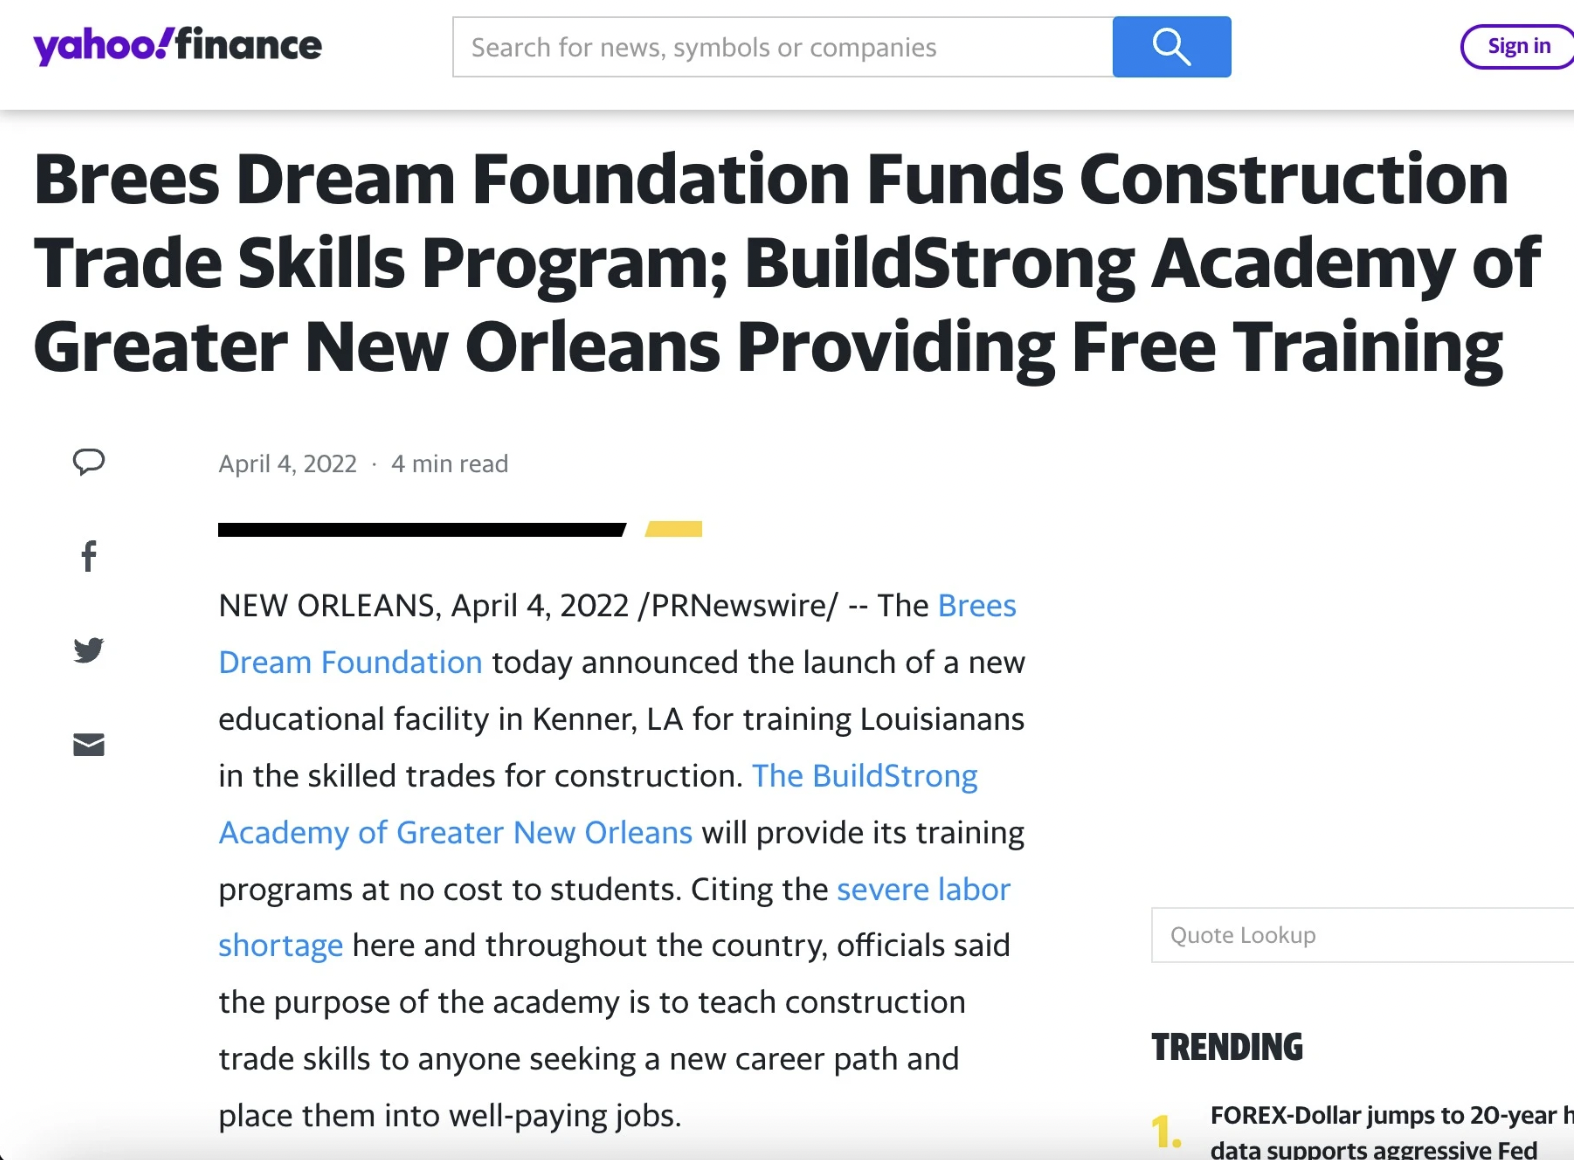 Screenshot of Yahoo! Finance Article titled "Brees Dream Foundation Funds Construction Trade Skills Program; BuildStrong Academy of Greater New Orleans Providing Free Training"